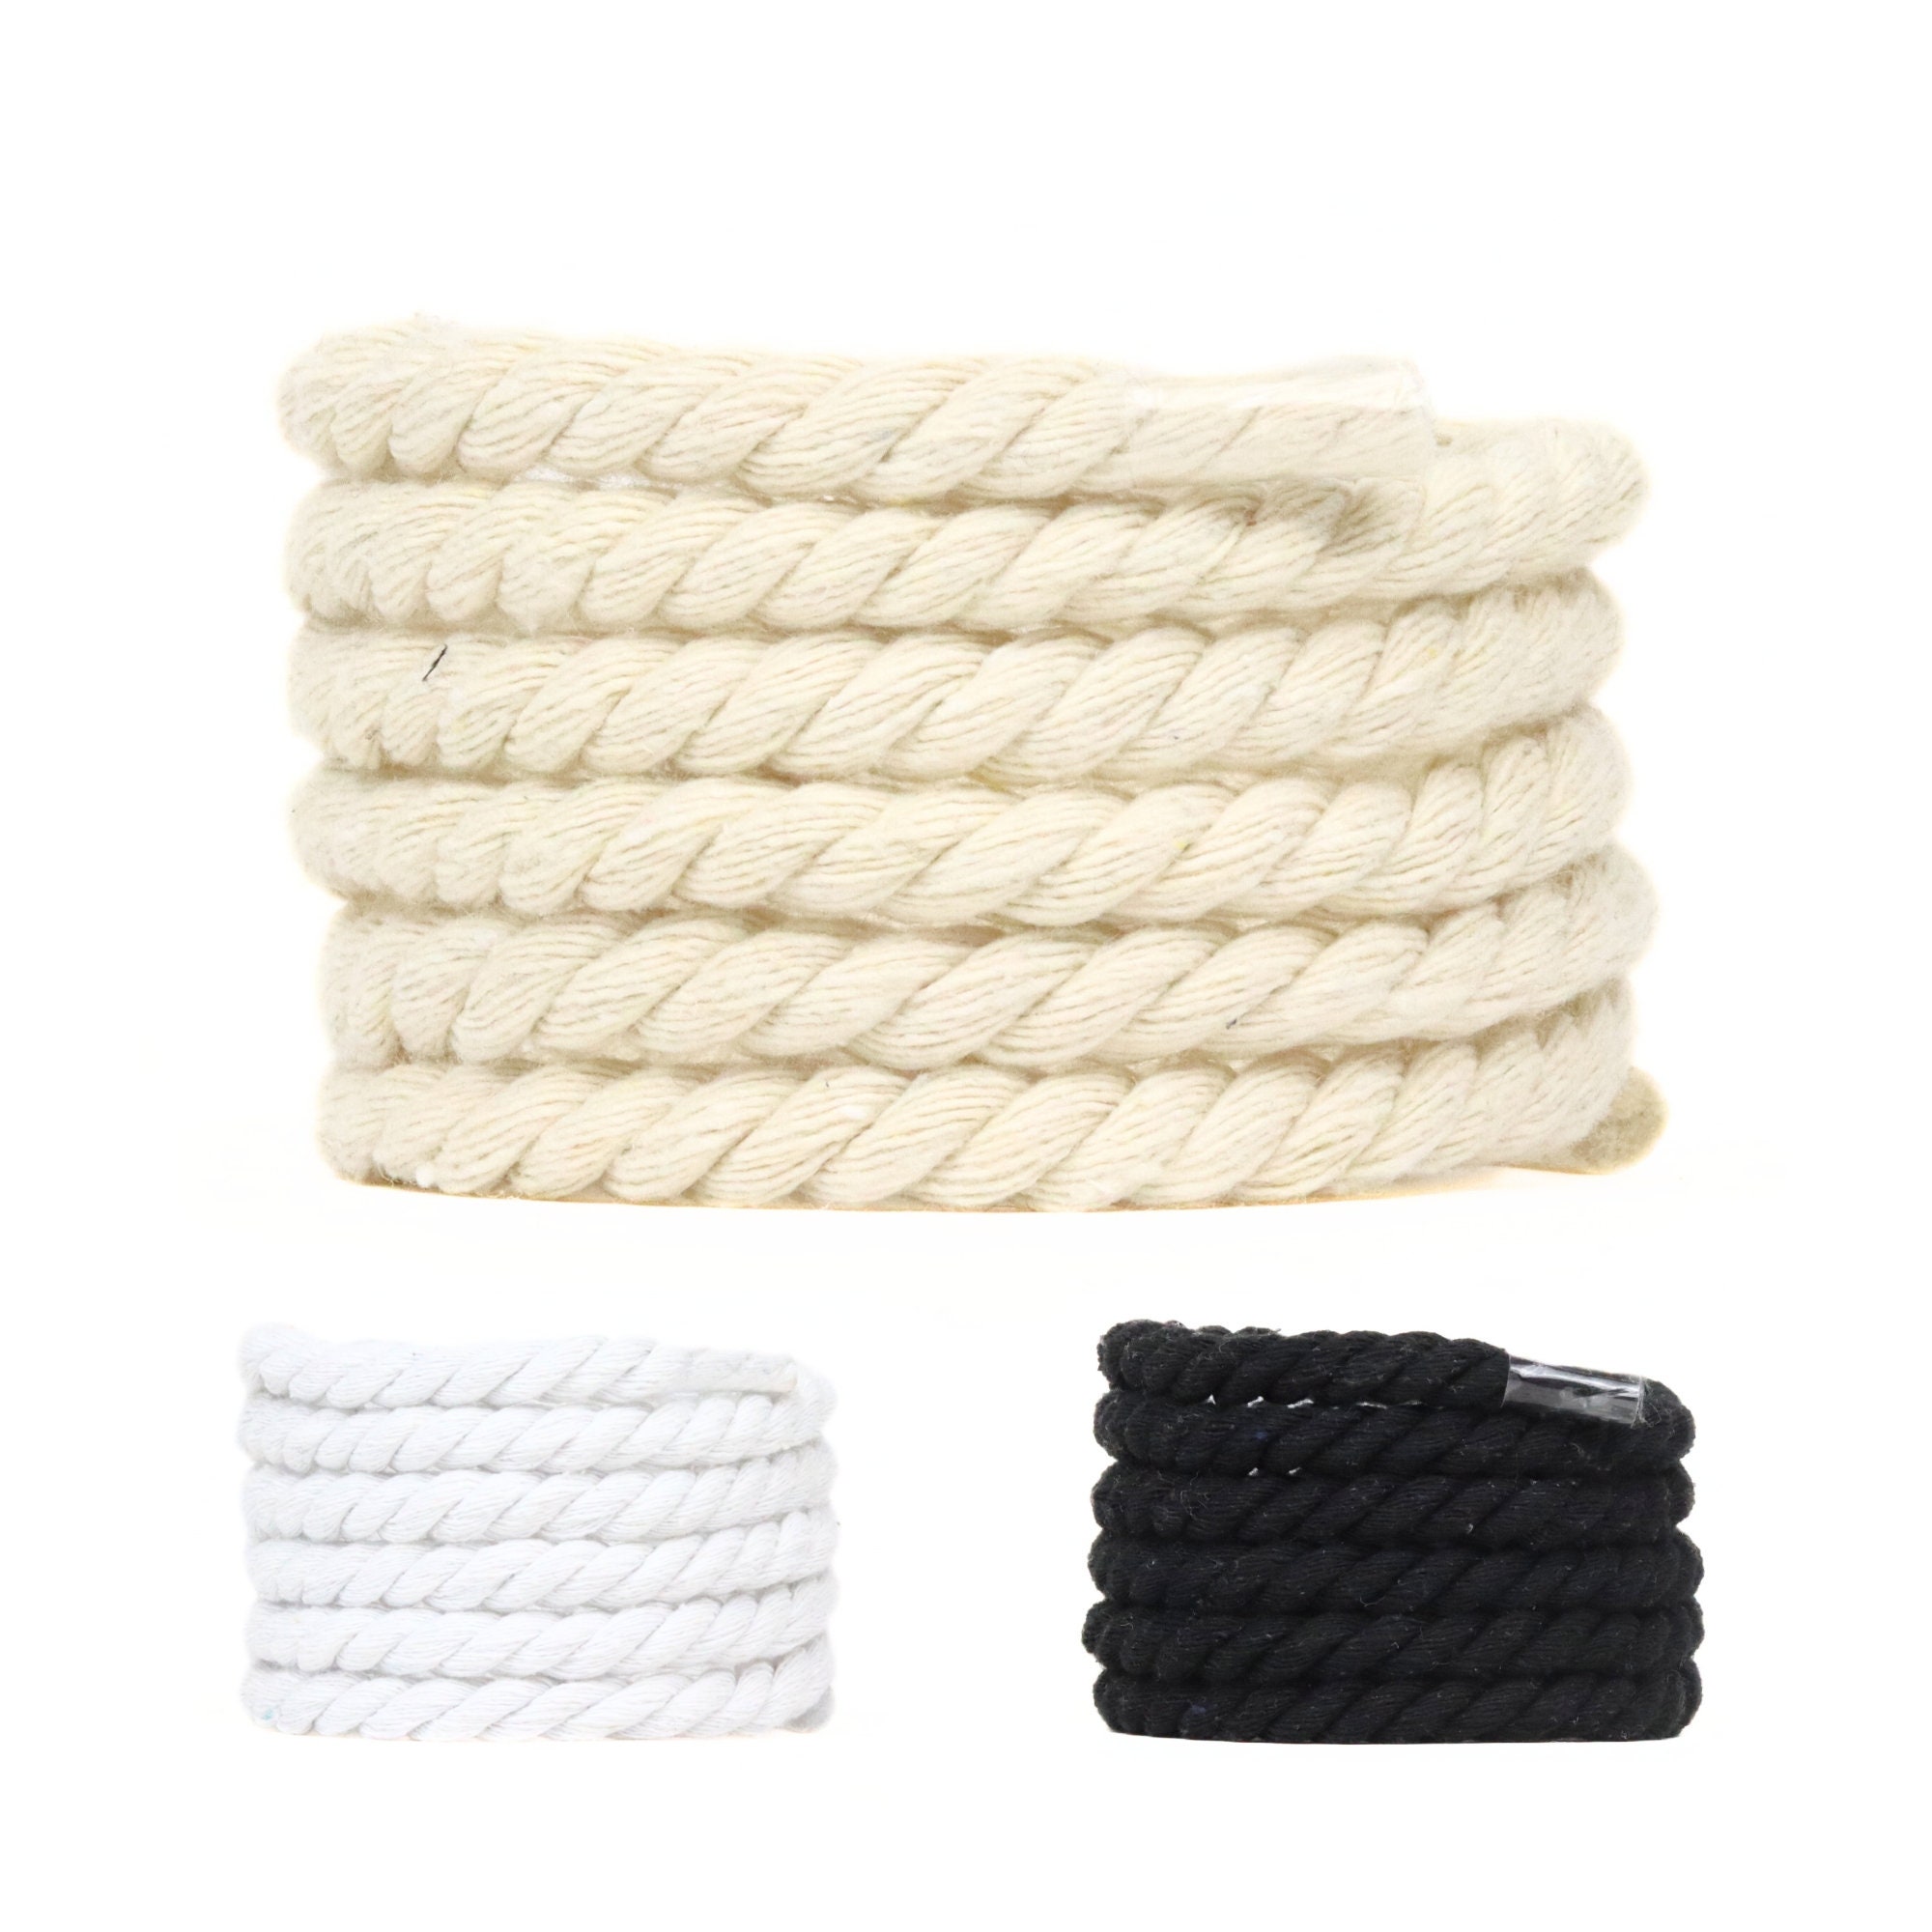  Chunky Laces White with White Aglets Natural Cotton Rope  Shoelaces, 14mm Thick, 160cm Length for Air Force 1, Boot Laces, Elastic  Laces, Ideal Thick Rope for Sneakers, Jordan shoes, Dunks 